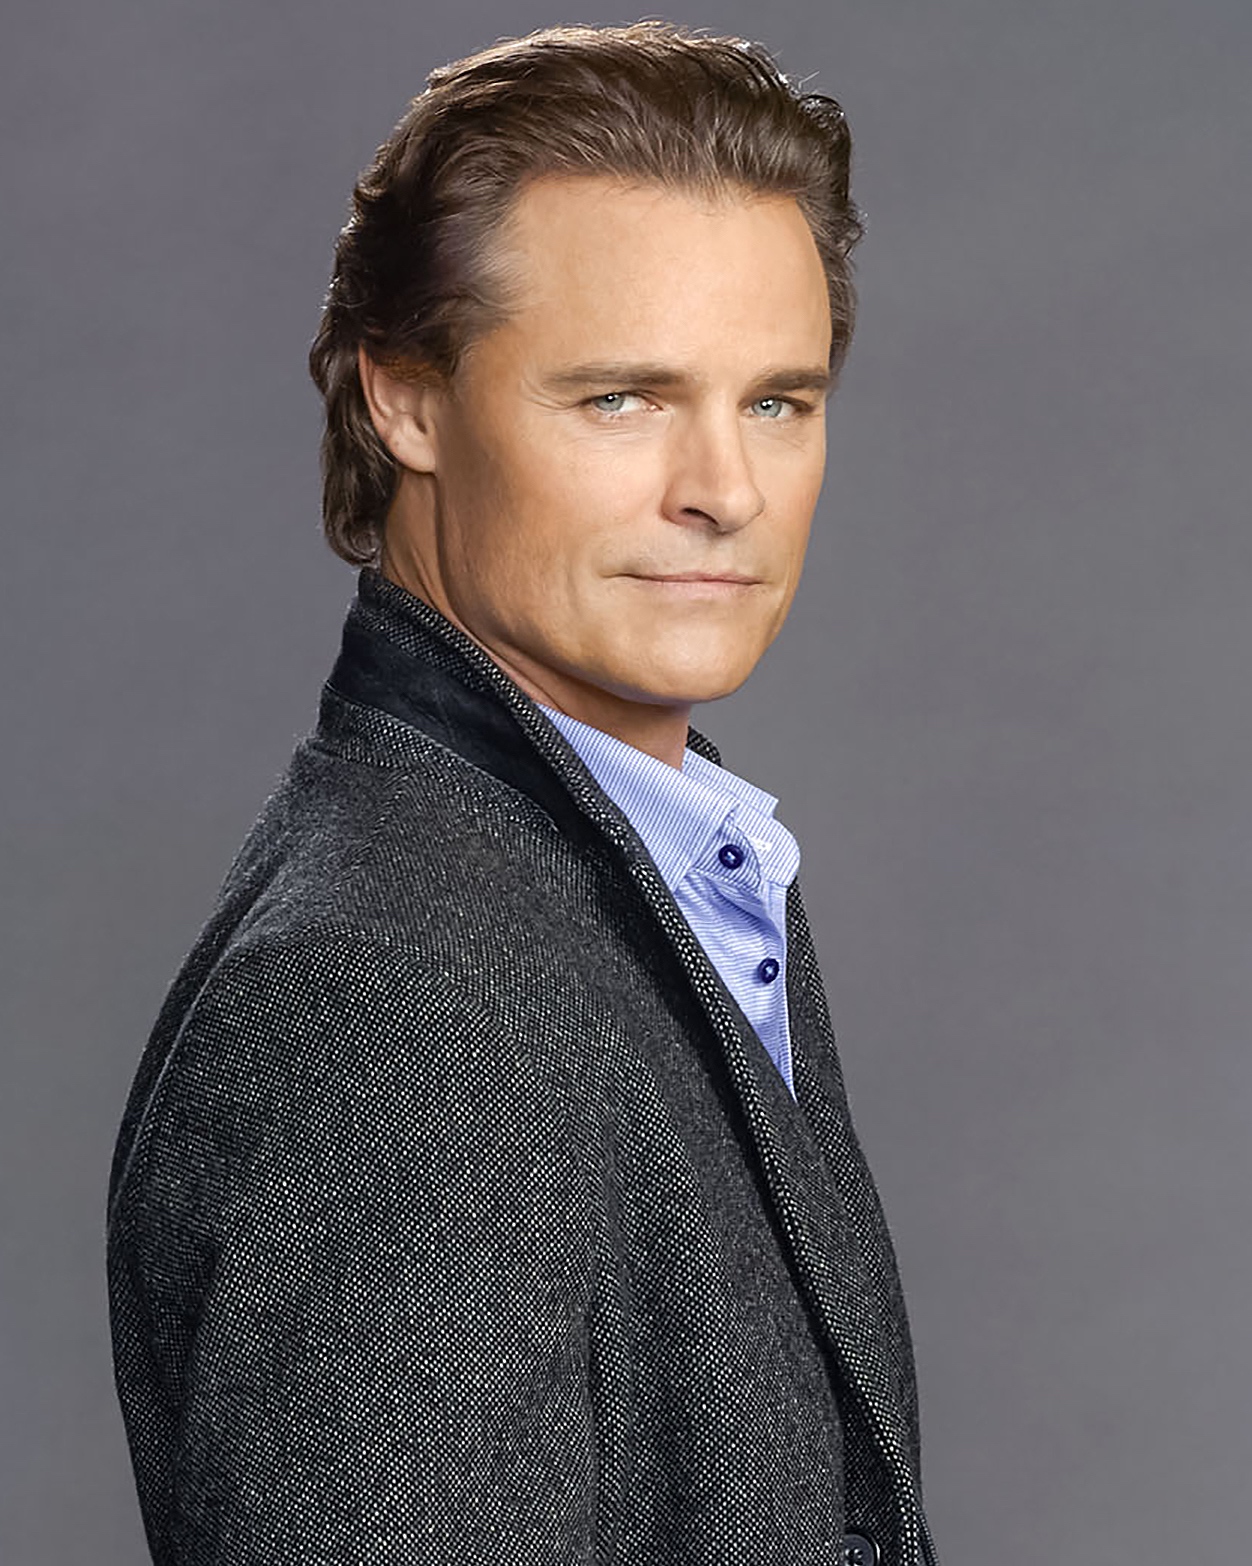 Gallery still of Dylan Neal as Henry Ross in Gourmet Detective, Hallmark Movies and Mysteries